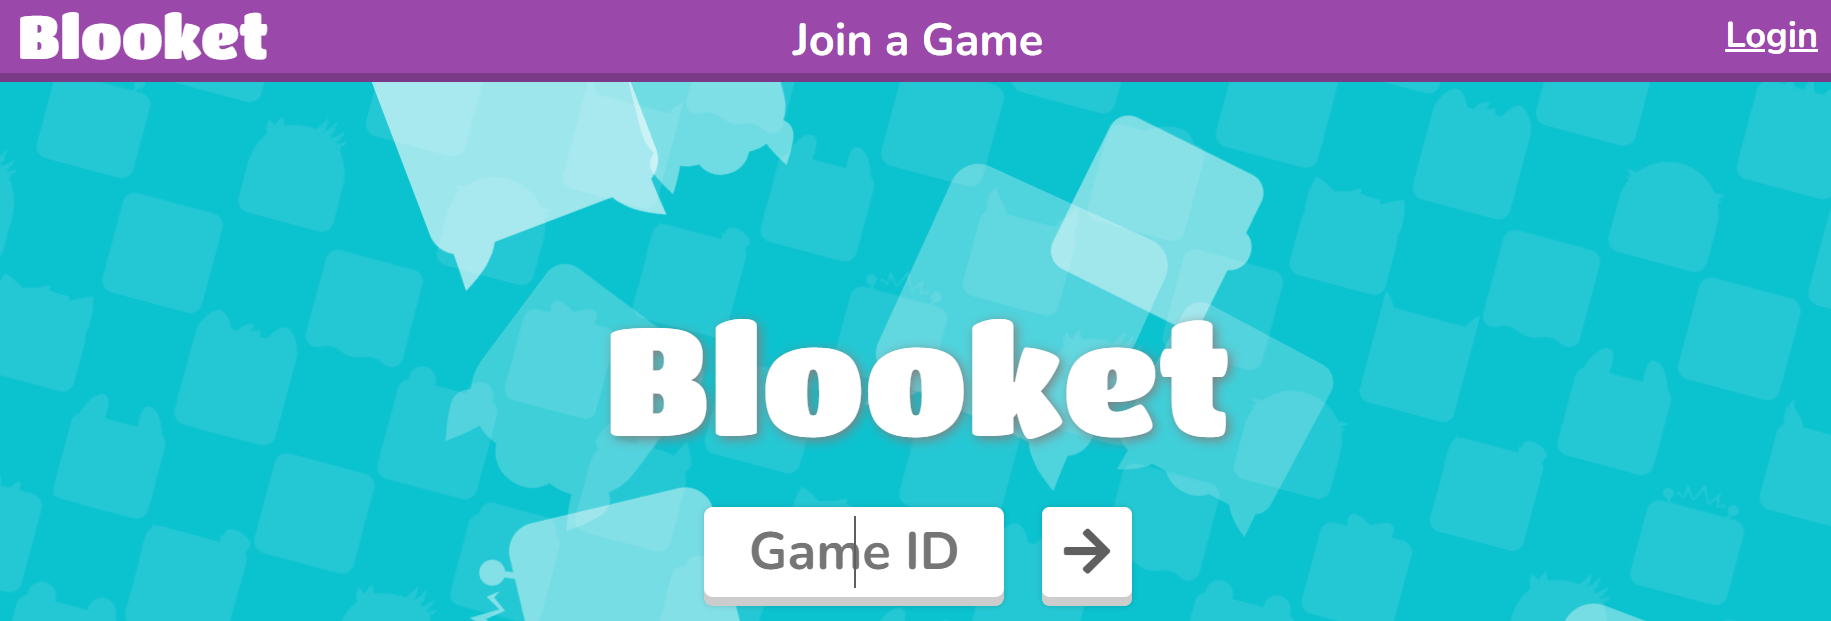 What Does Blooket Provide?